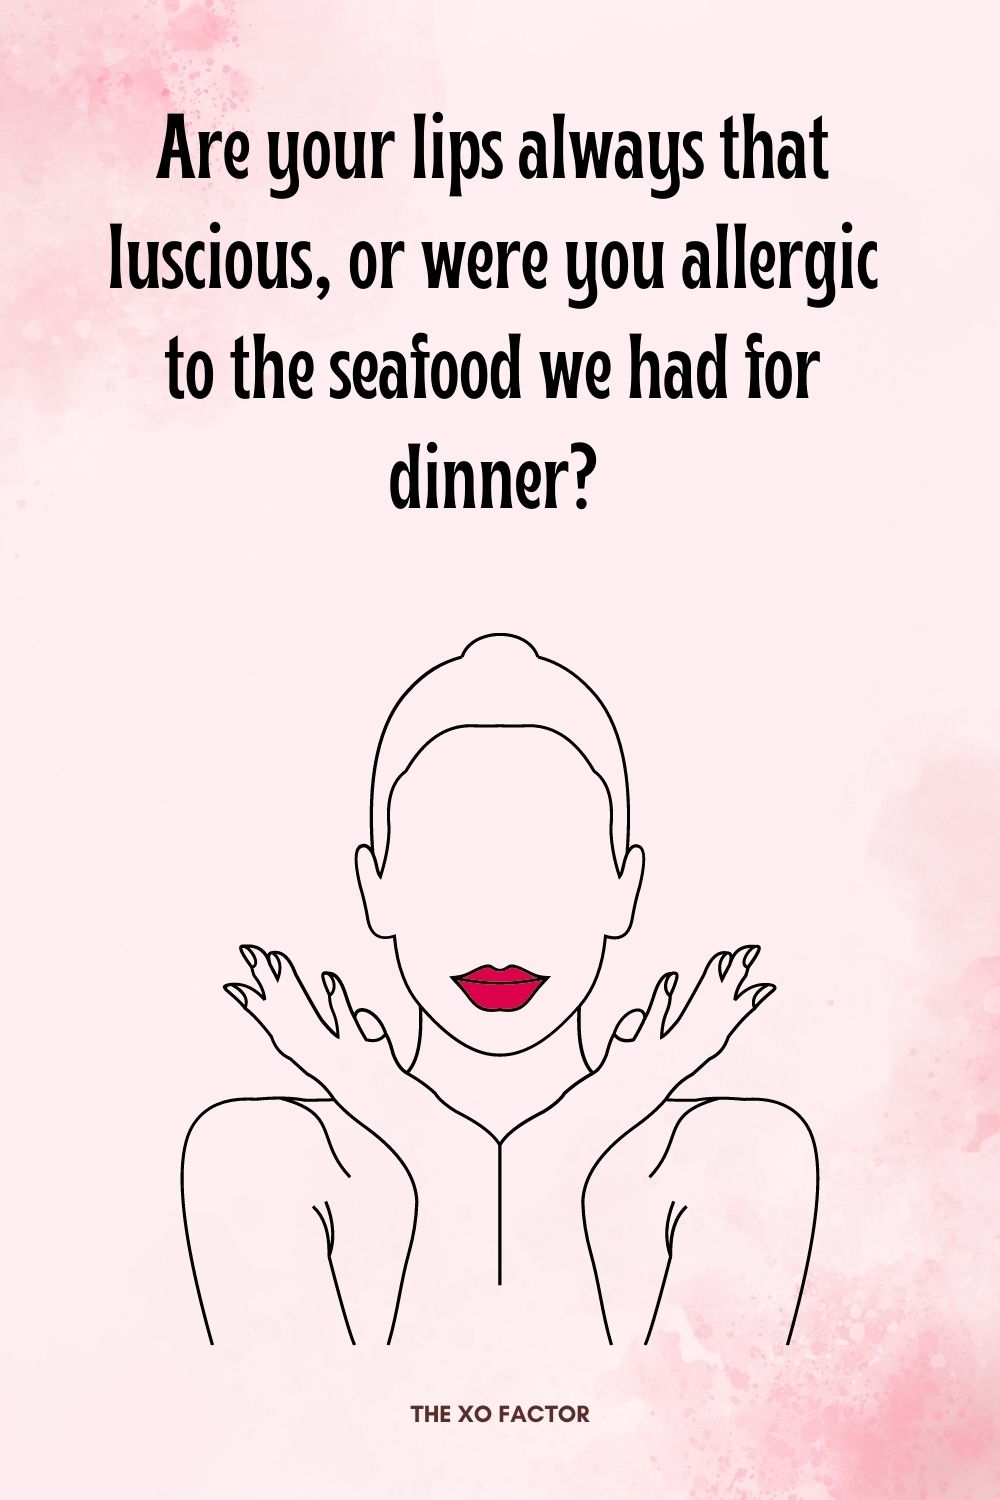 Are your lips always that luscious, or were you allergic to the seafood we had for dinner?